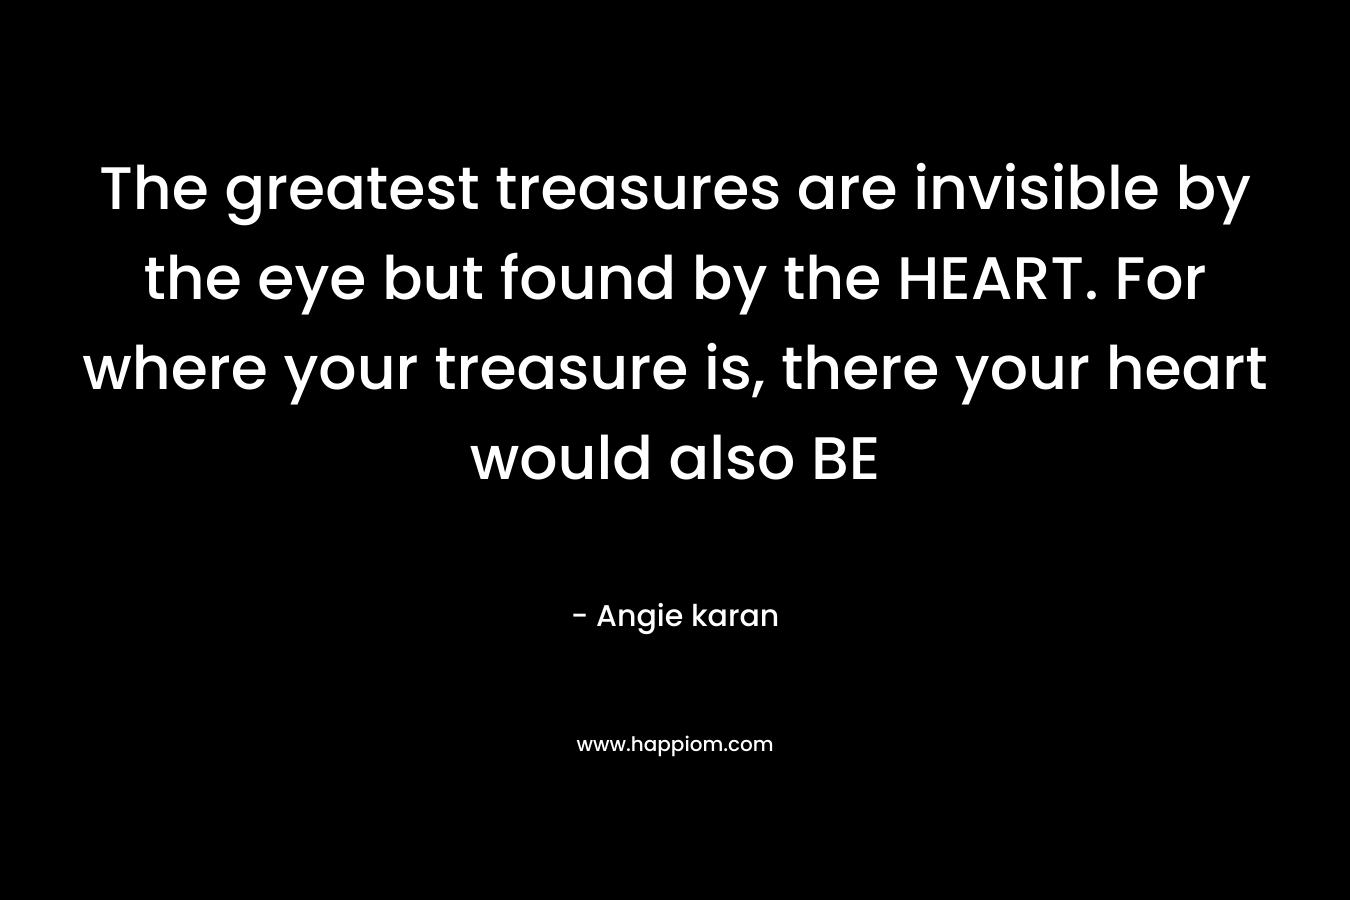 The greatest treasures are invisible by the eye but found by the HEART. For where your treasure is, there your heart would also BE